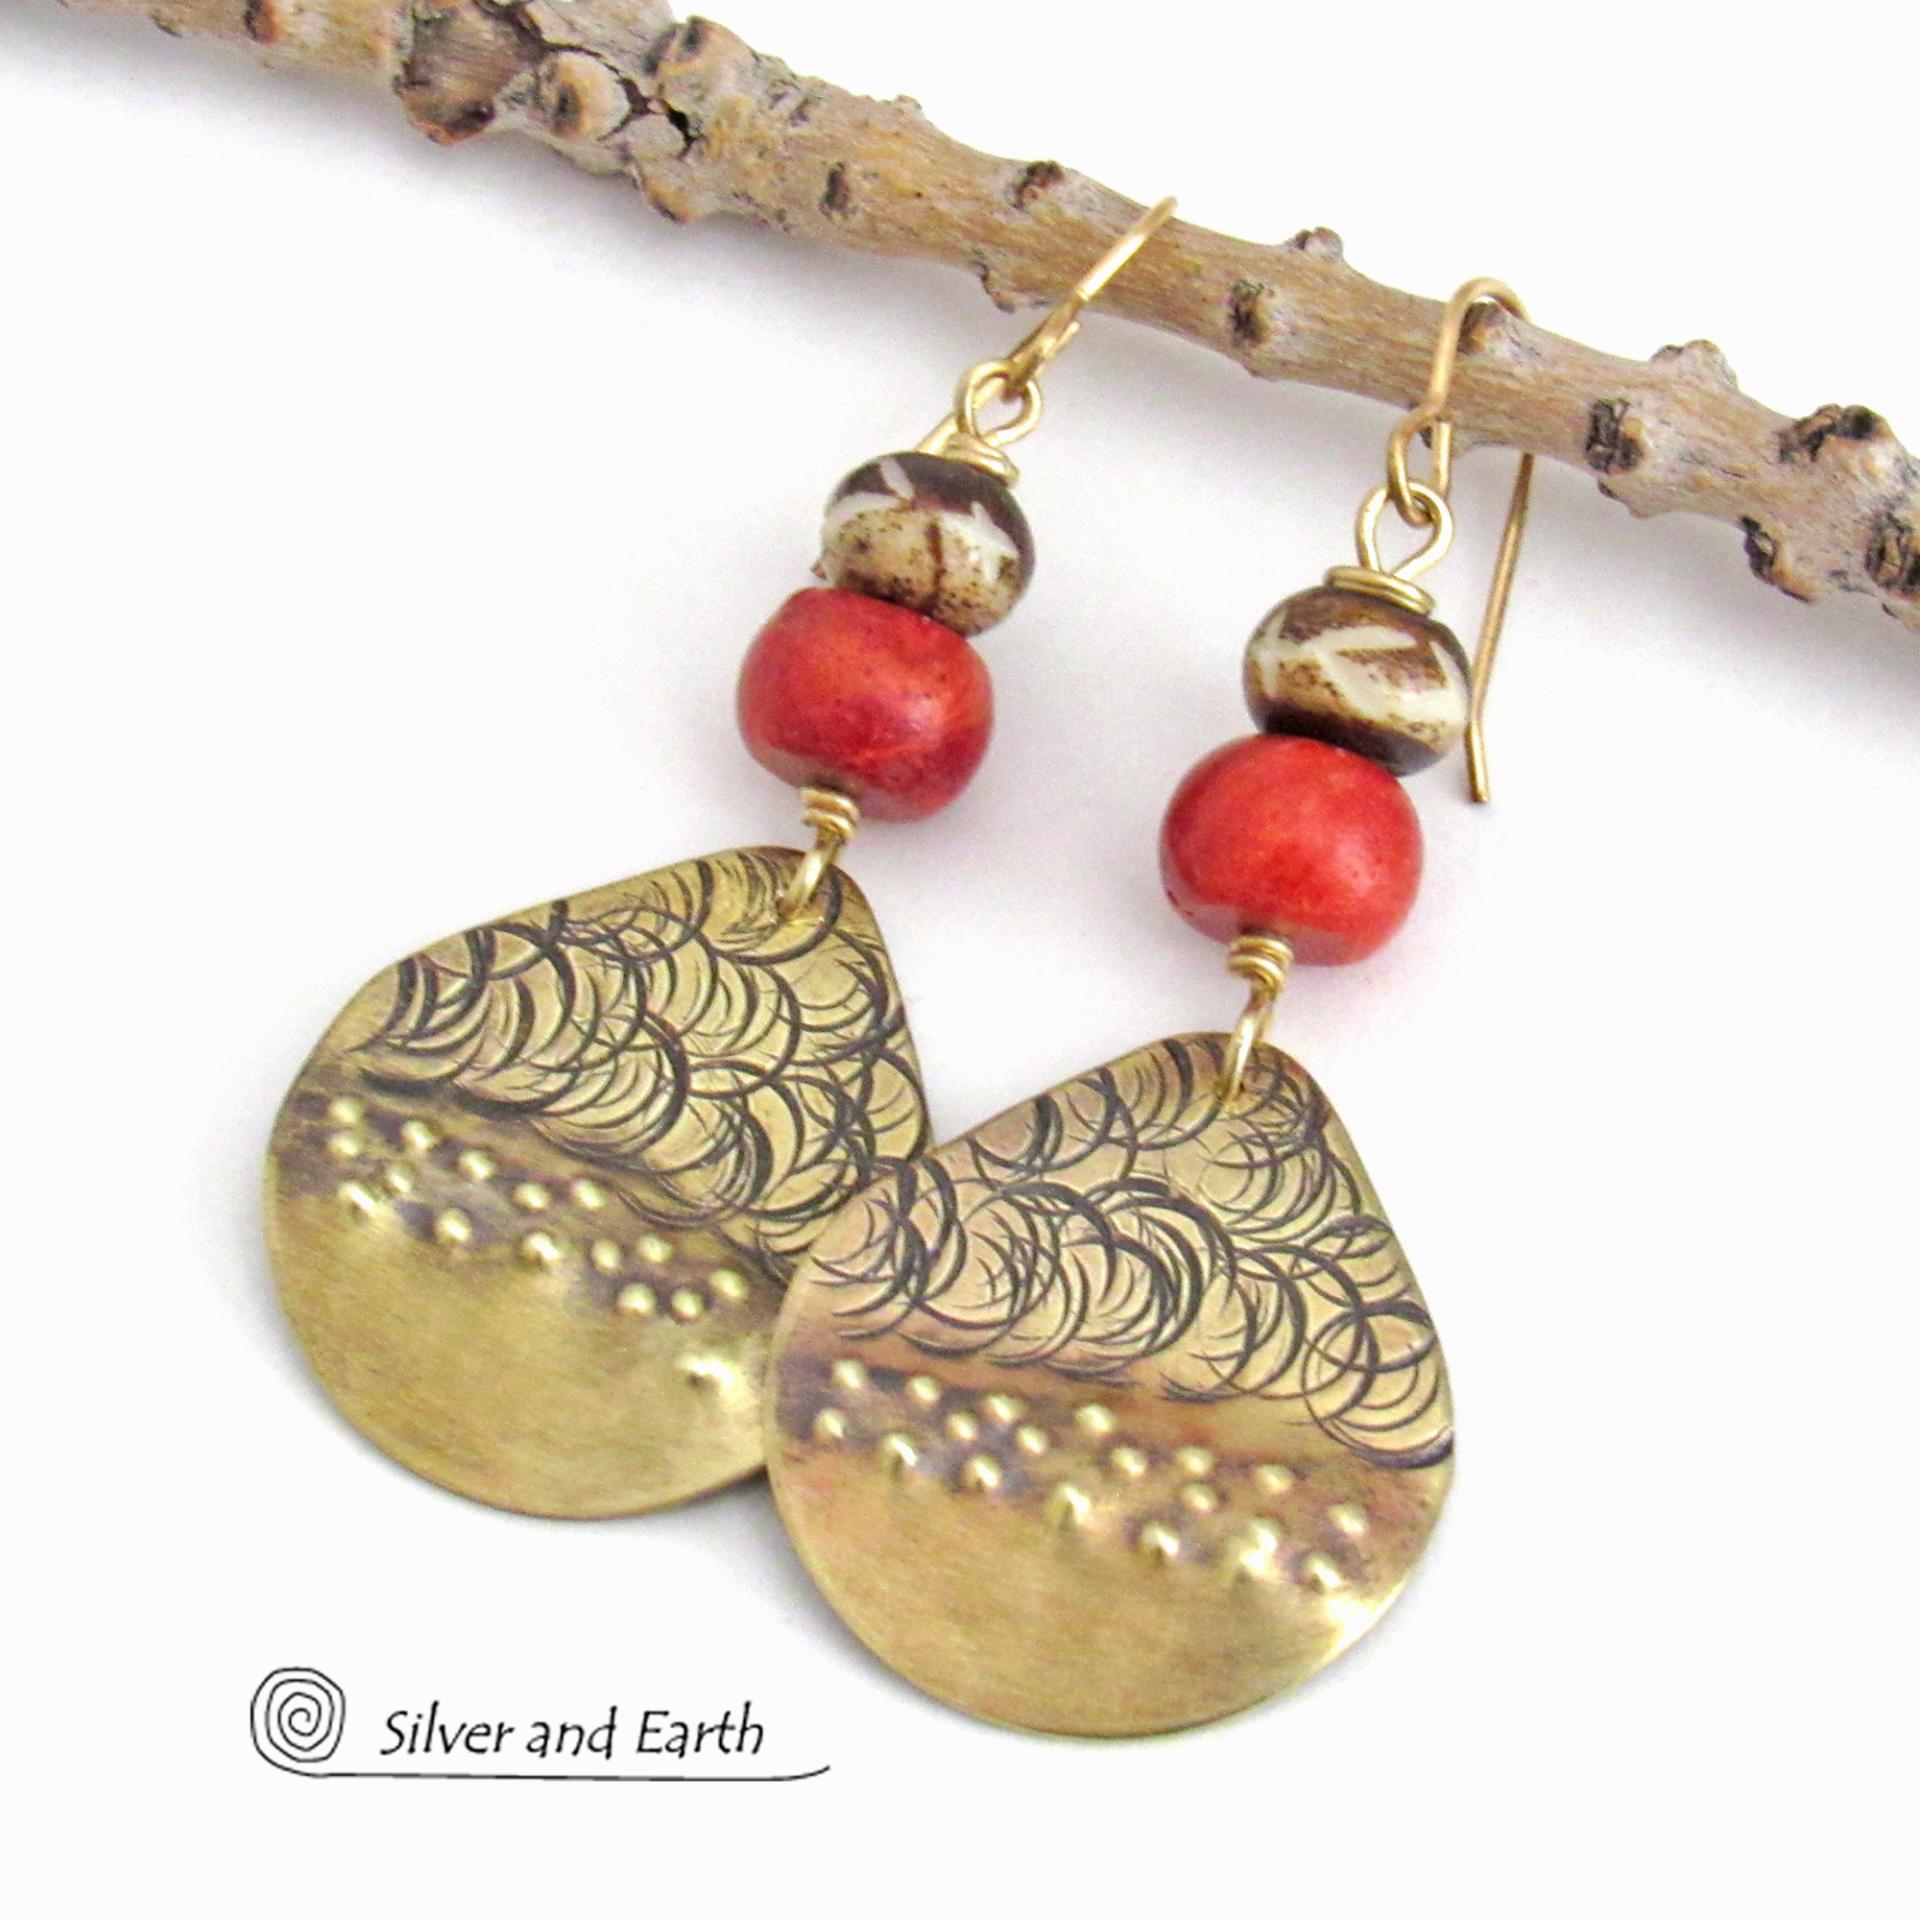 Bronze Earrings with Red Coral & African Carved Bone - Handcrafted Boho Chic Tribal Style Statement Jewelry